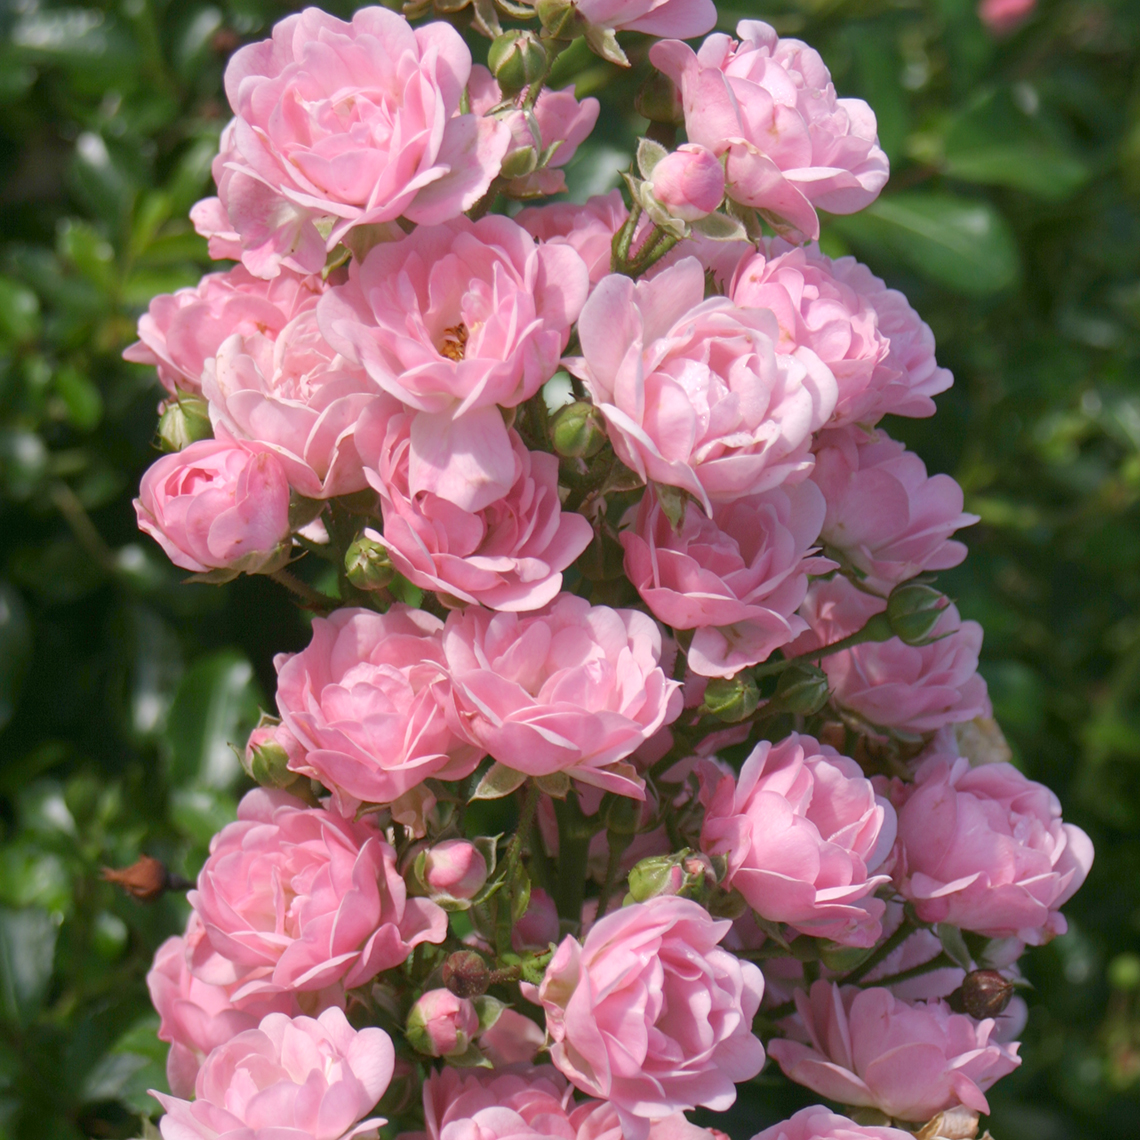 Heavy blooming light pink The Fairy Rose